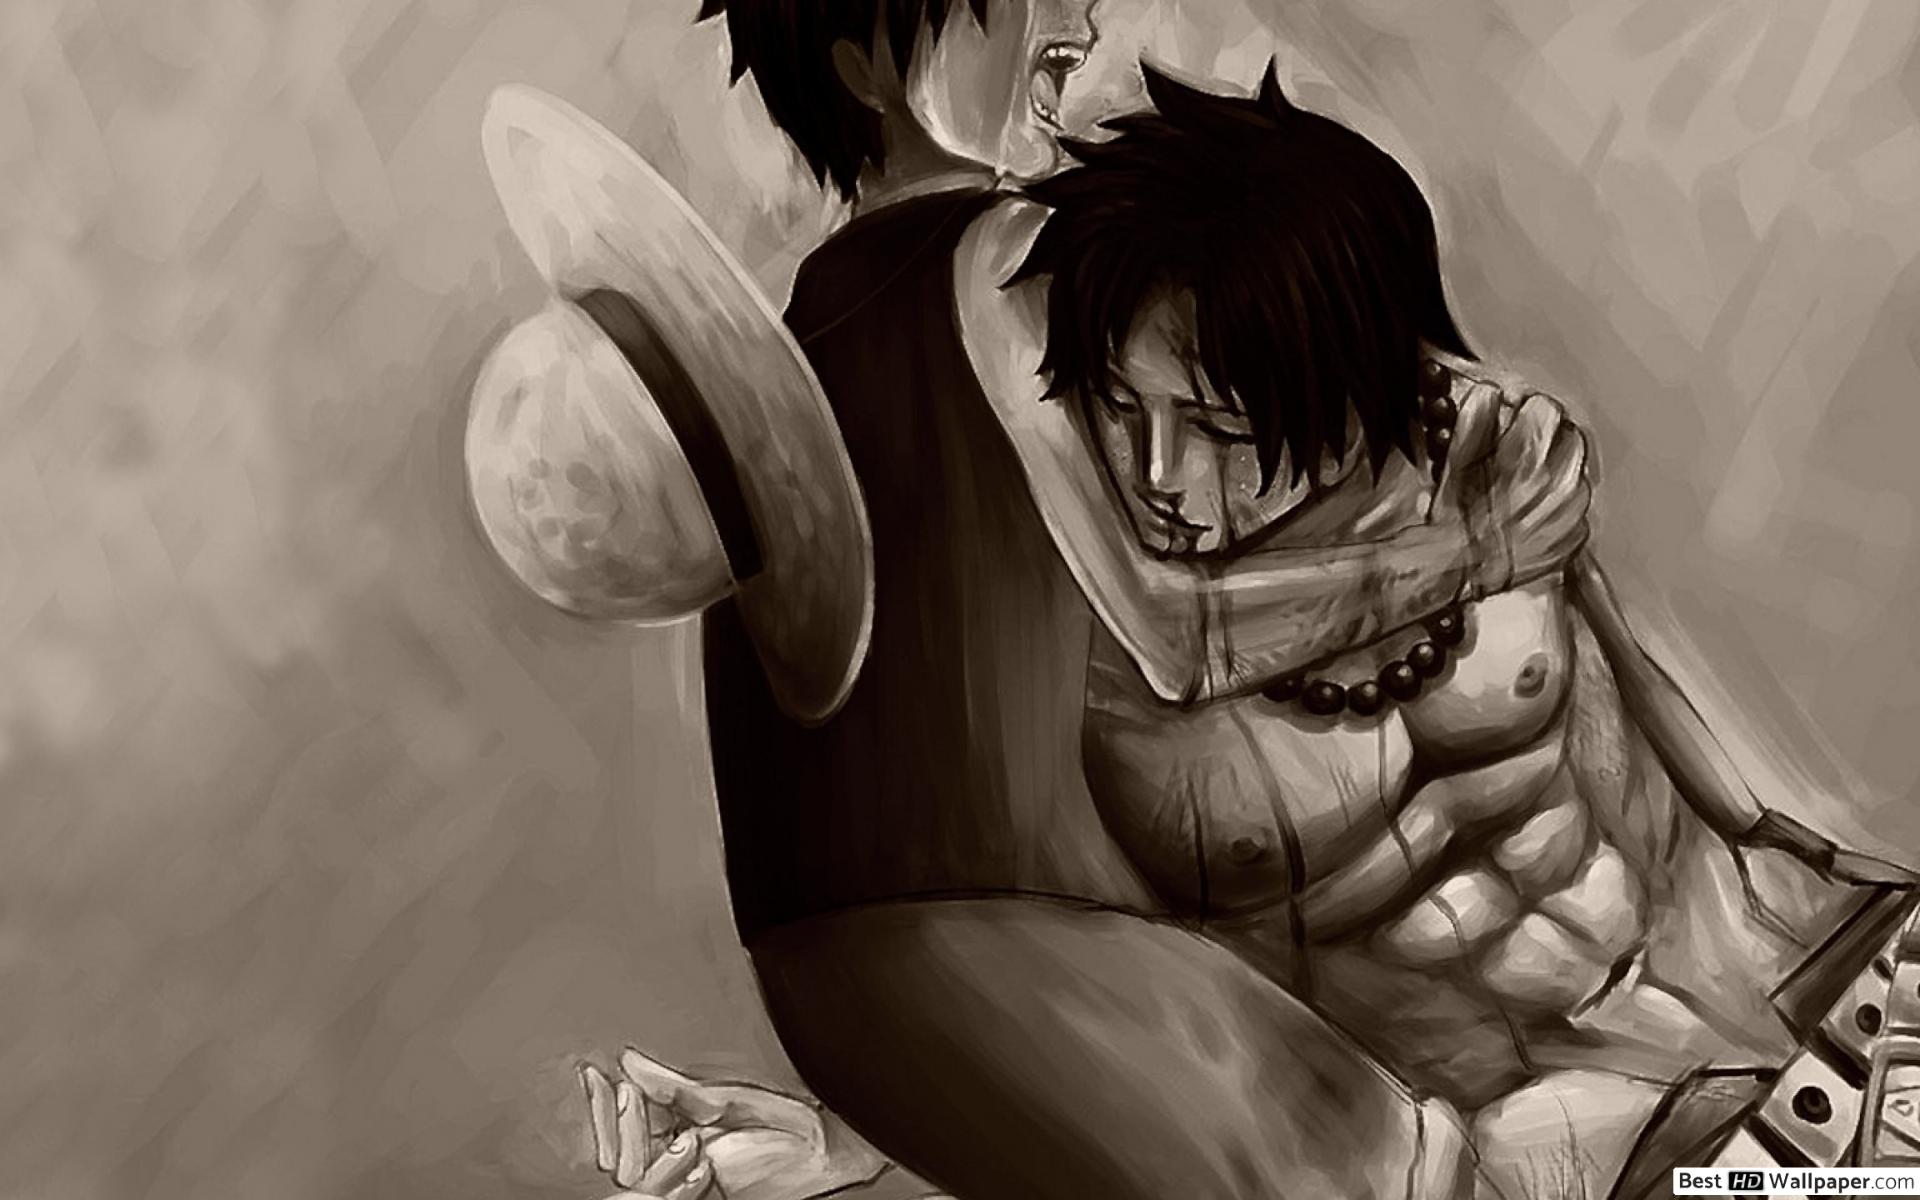 One Piece D. Luffy, Portgas D. Ace, Crying, Ace Died HD wallpaper download